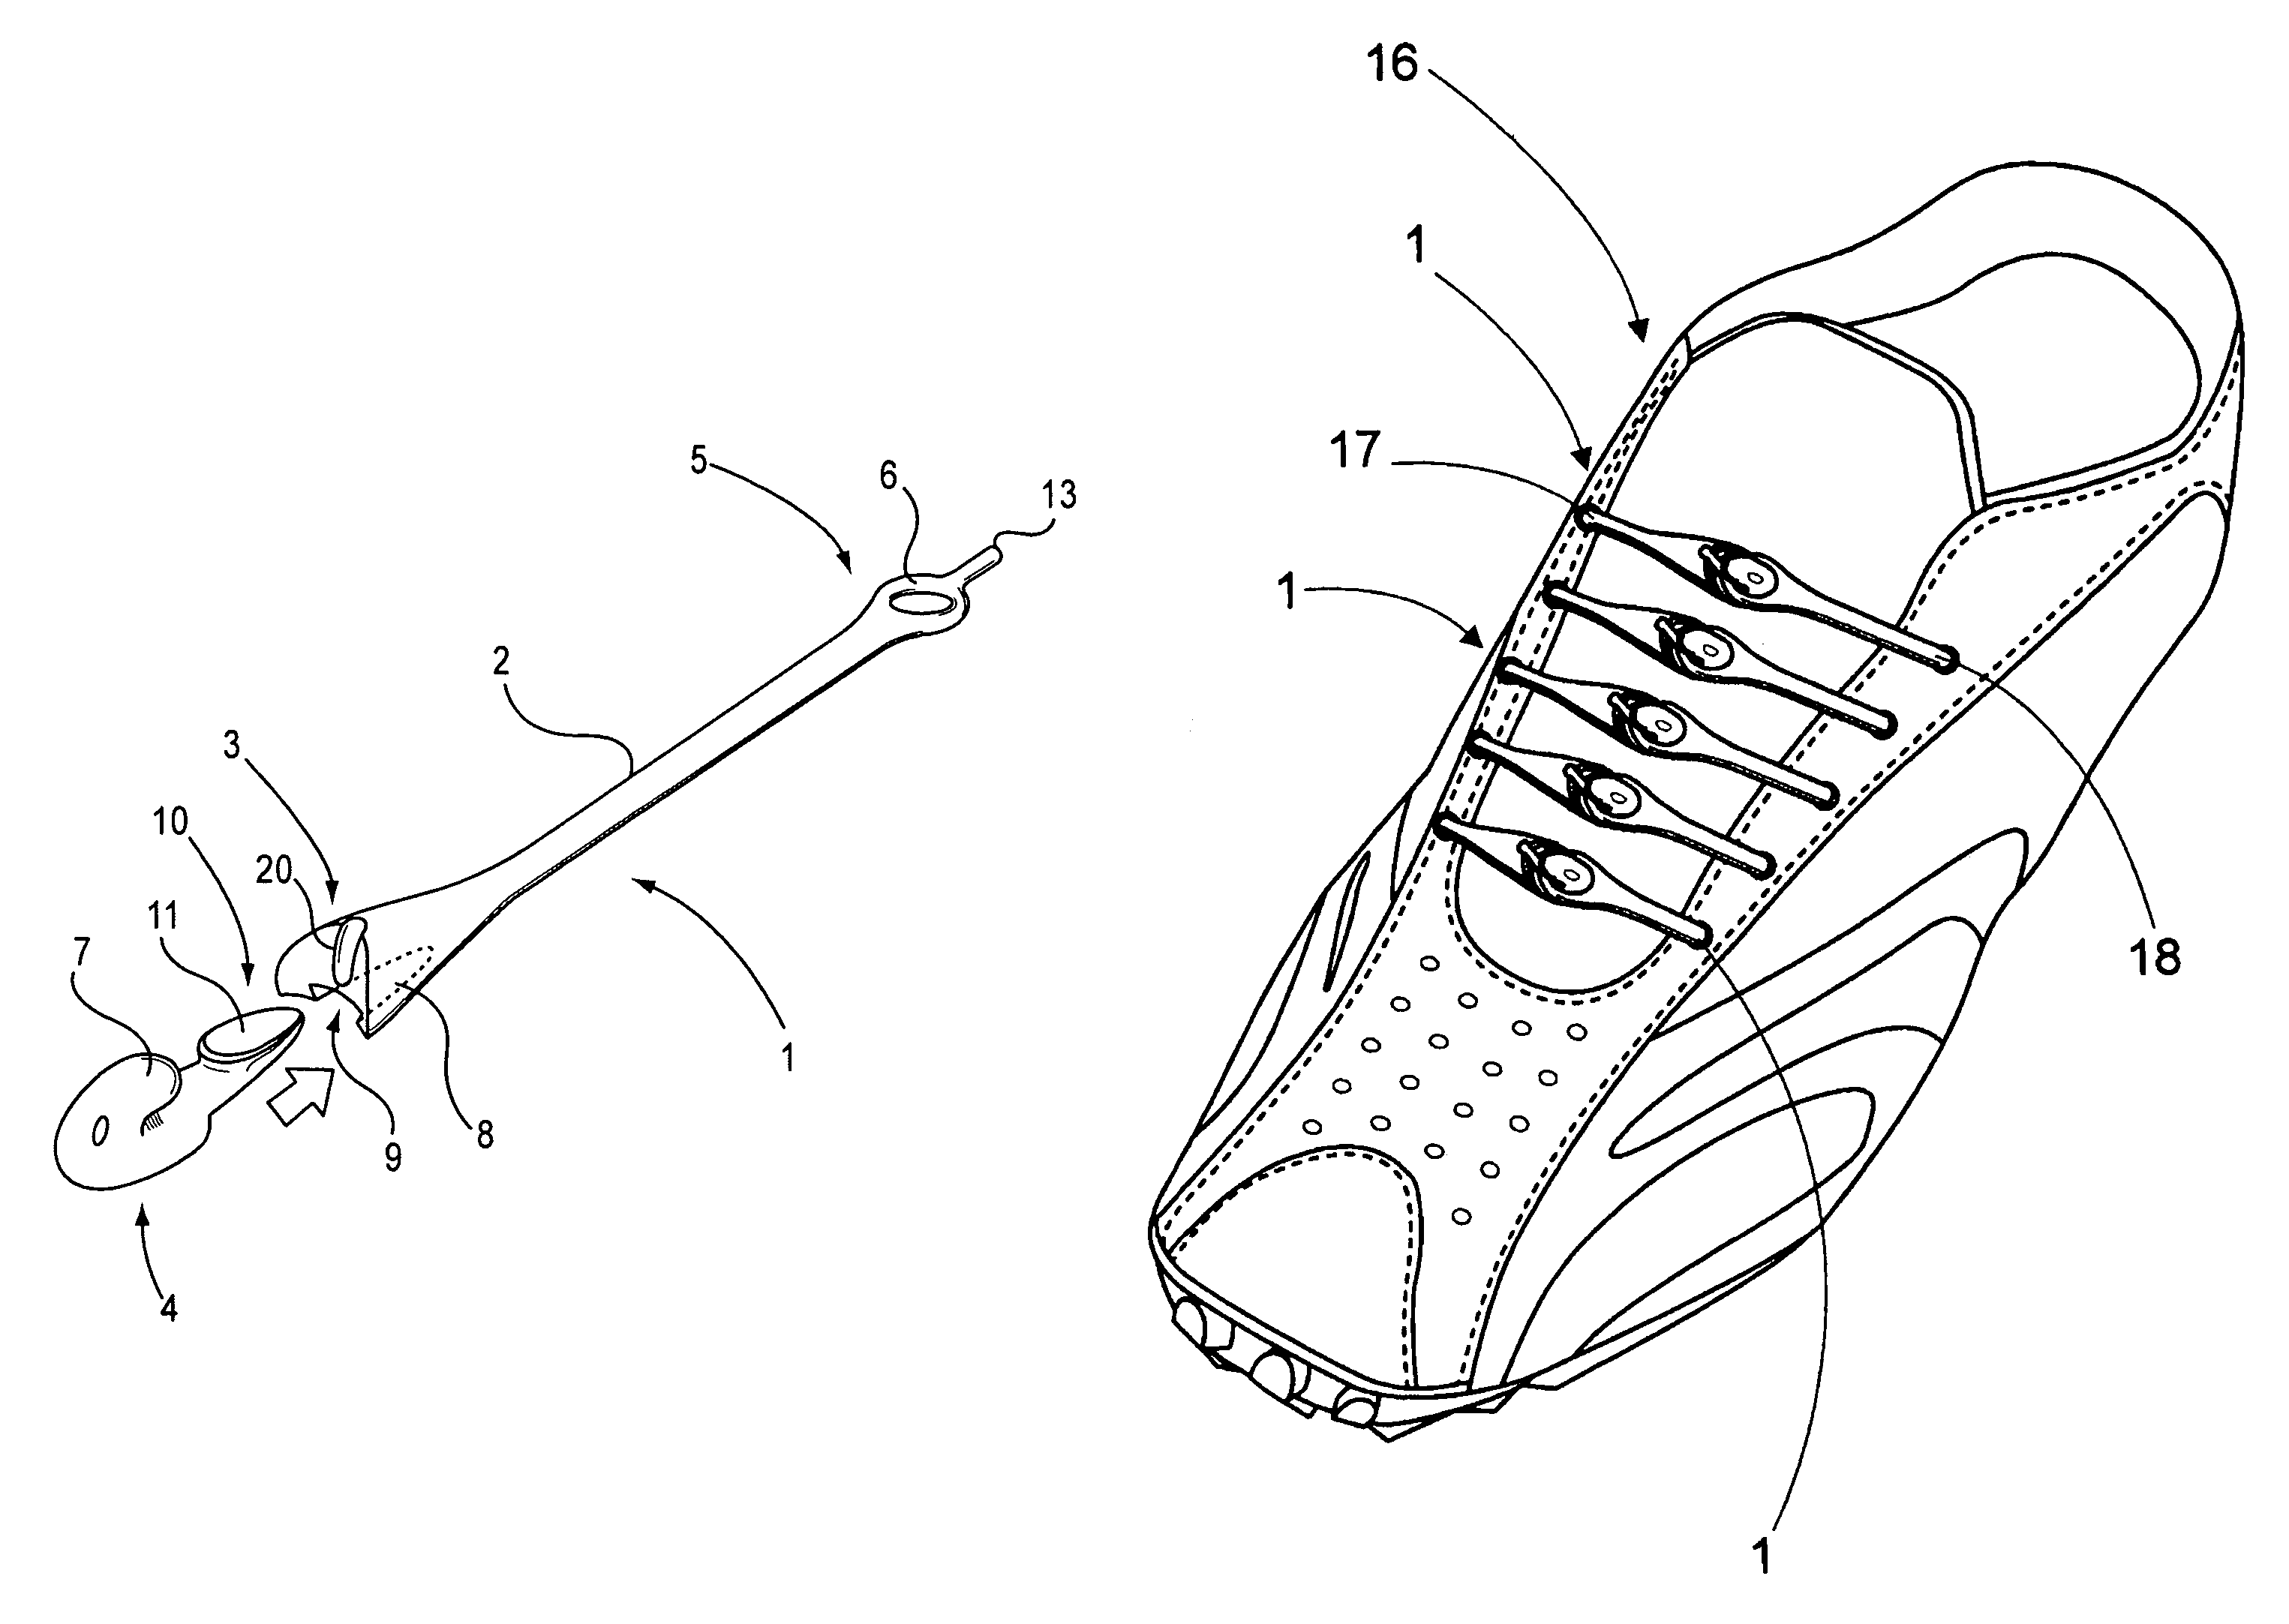 Footwear and clothes fastening and transforming system